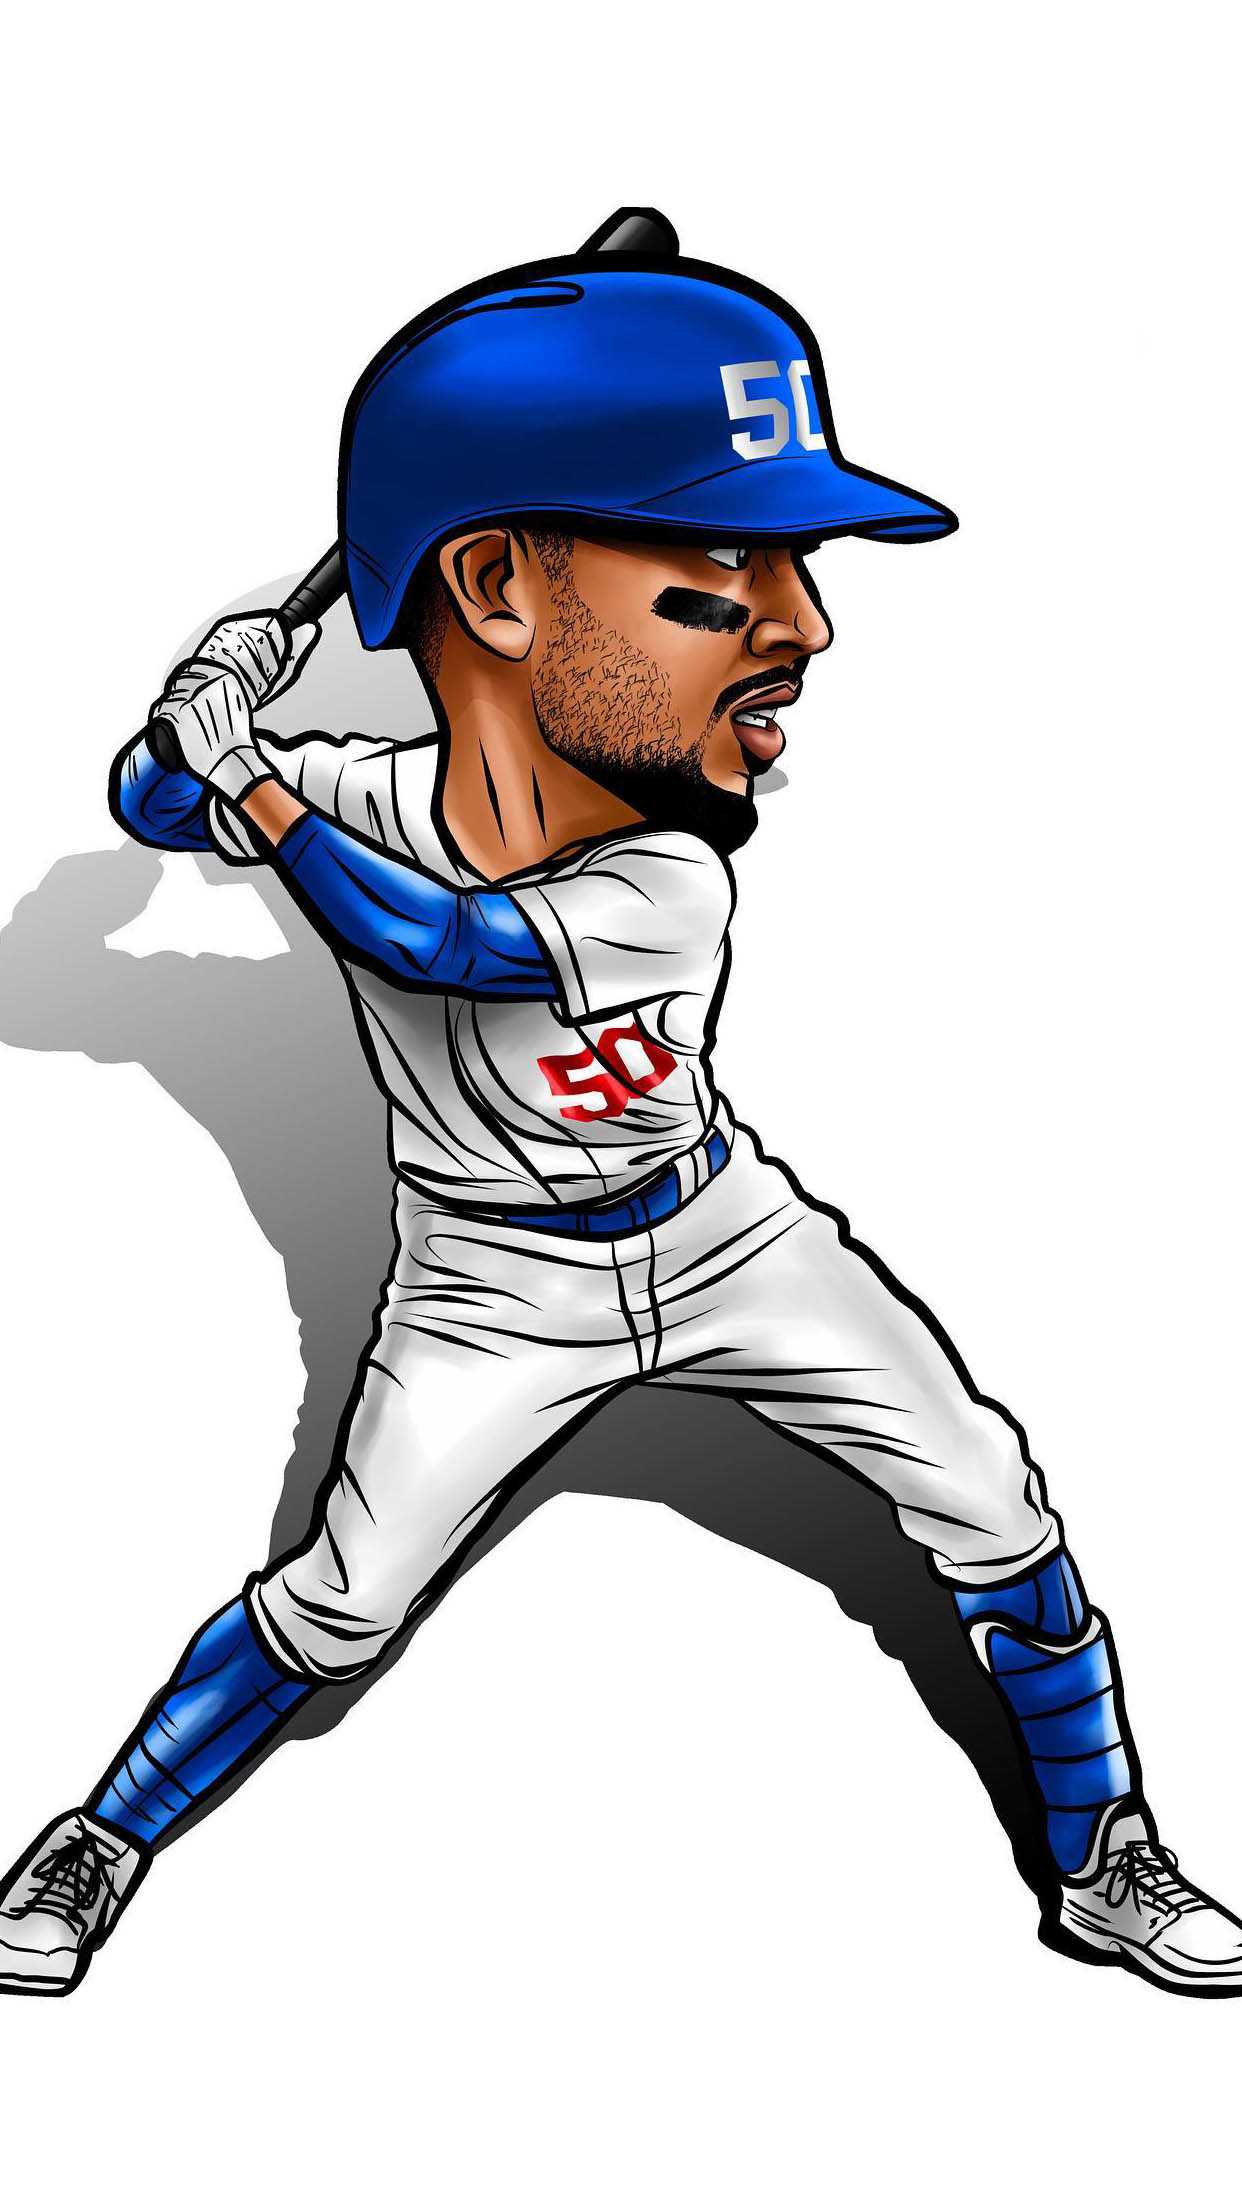 MLB player profile Mookie Betts  Theres no crying in baseball blog